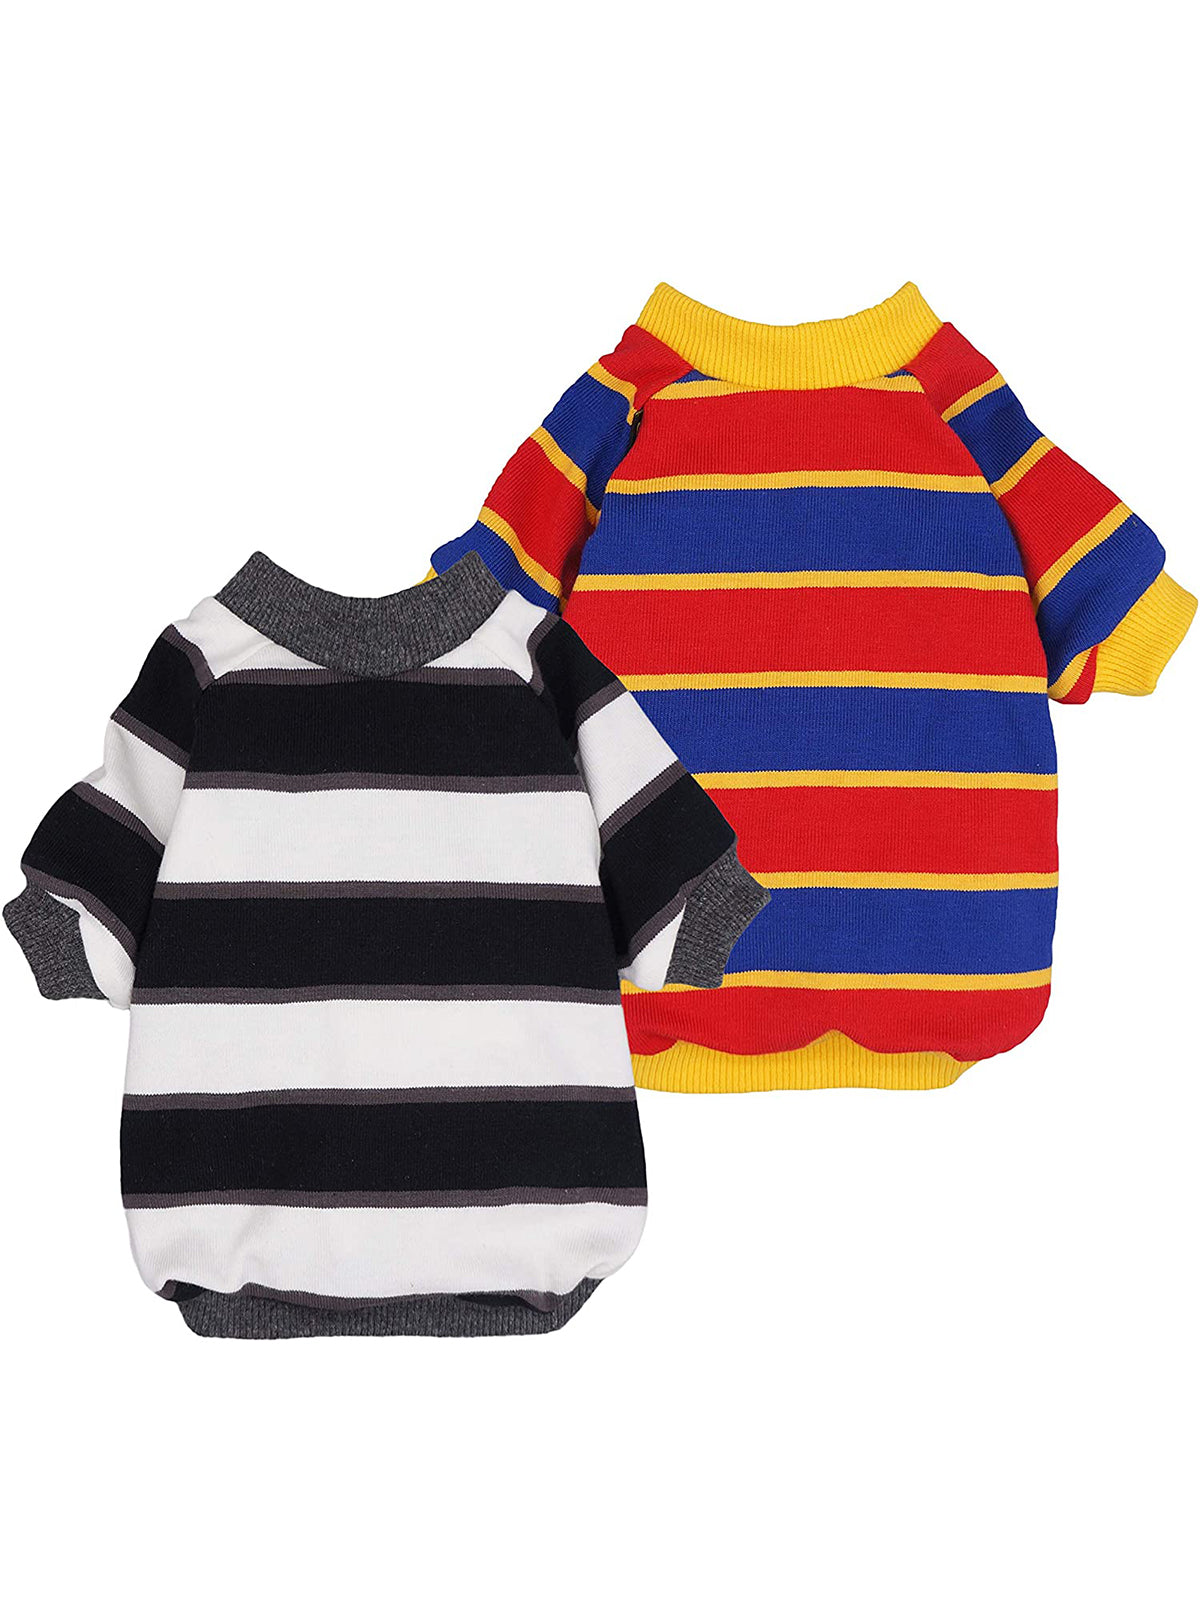 The Chroma Striped (2-Pack) Dog Tee